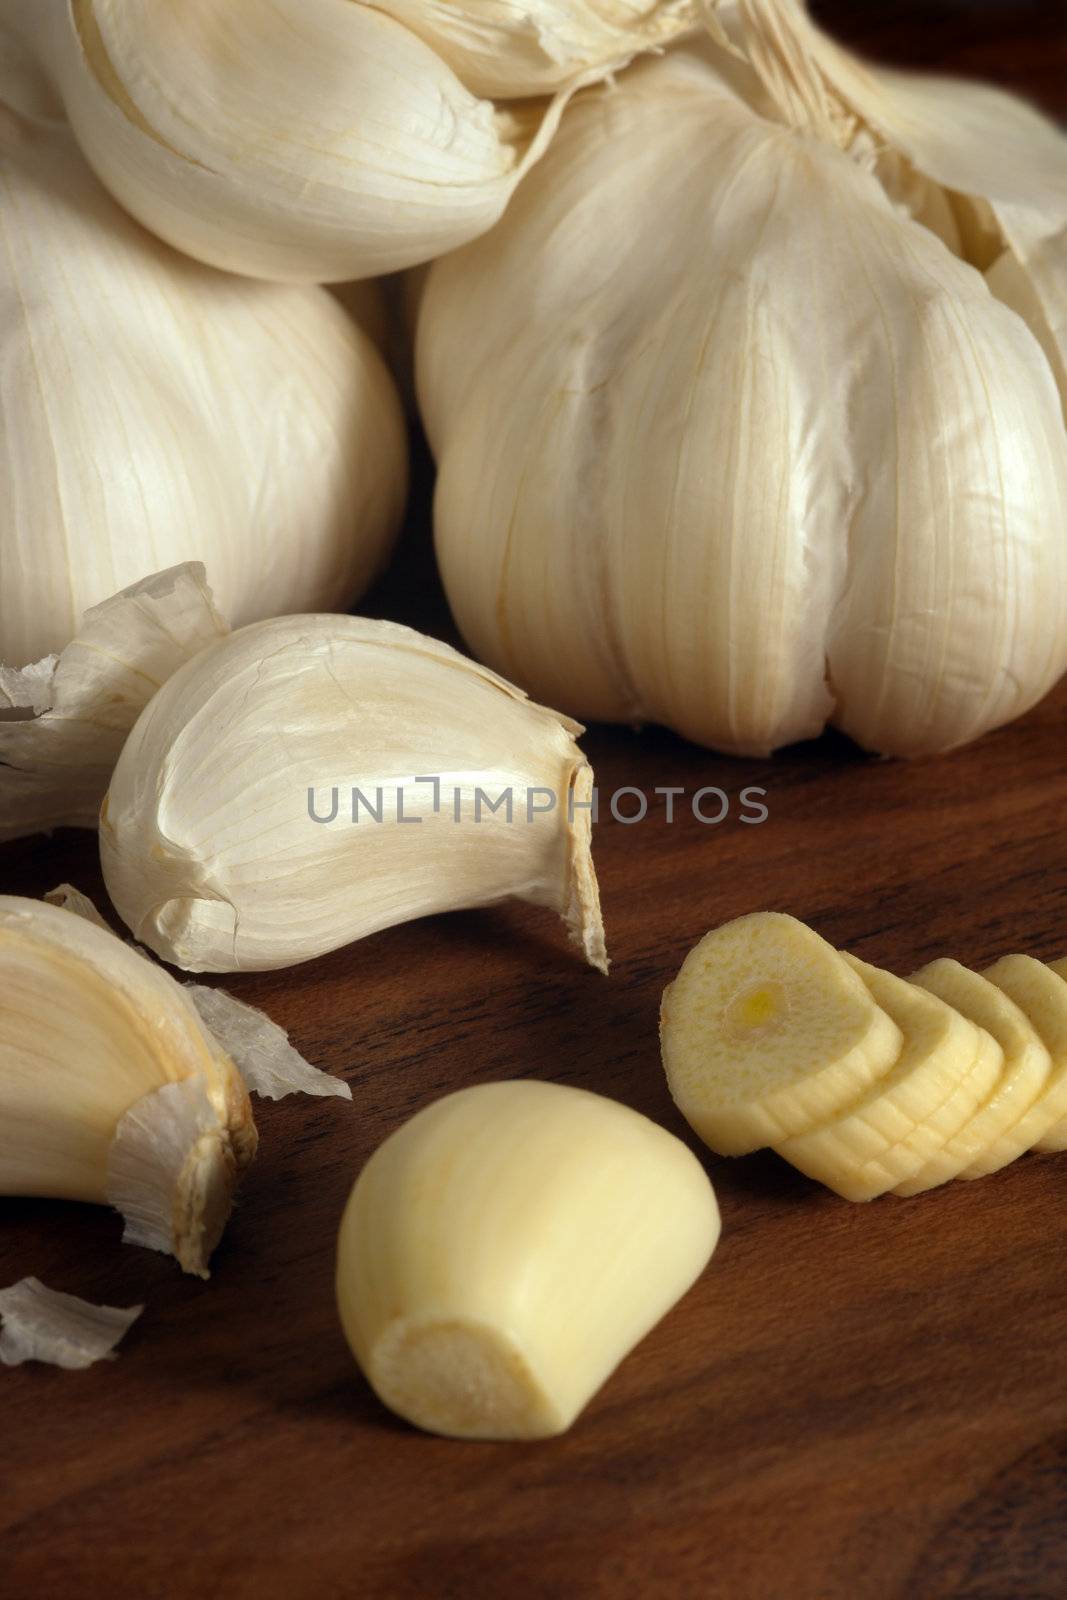 Cloves and sliced garlic on a wood cutting board.
